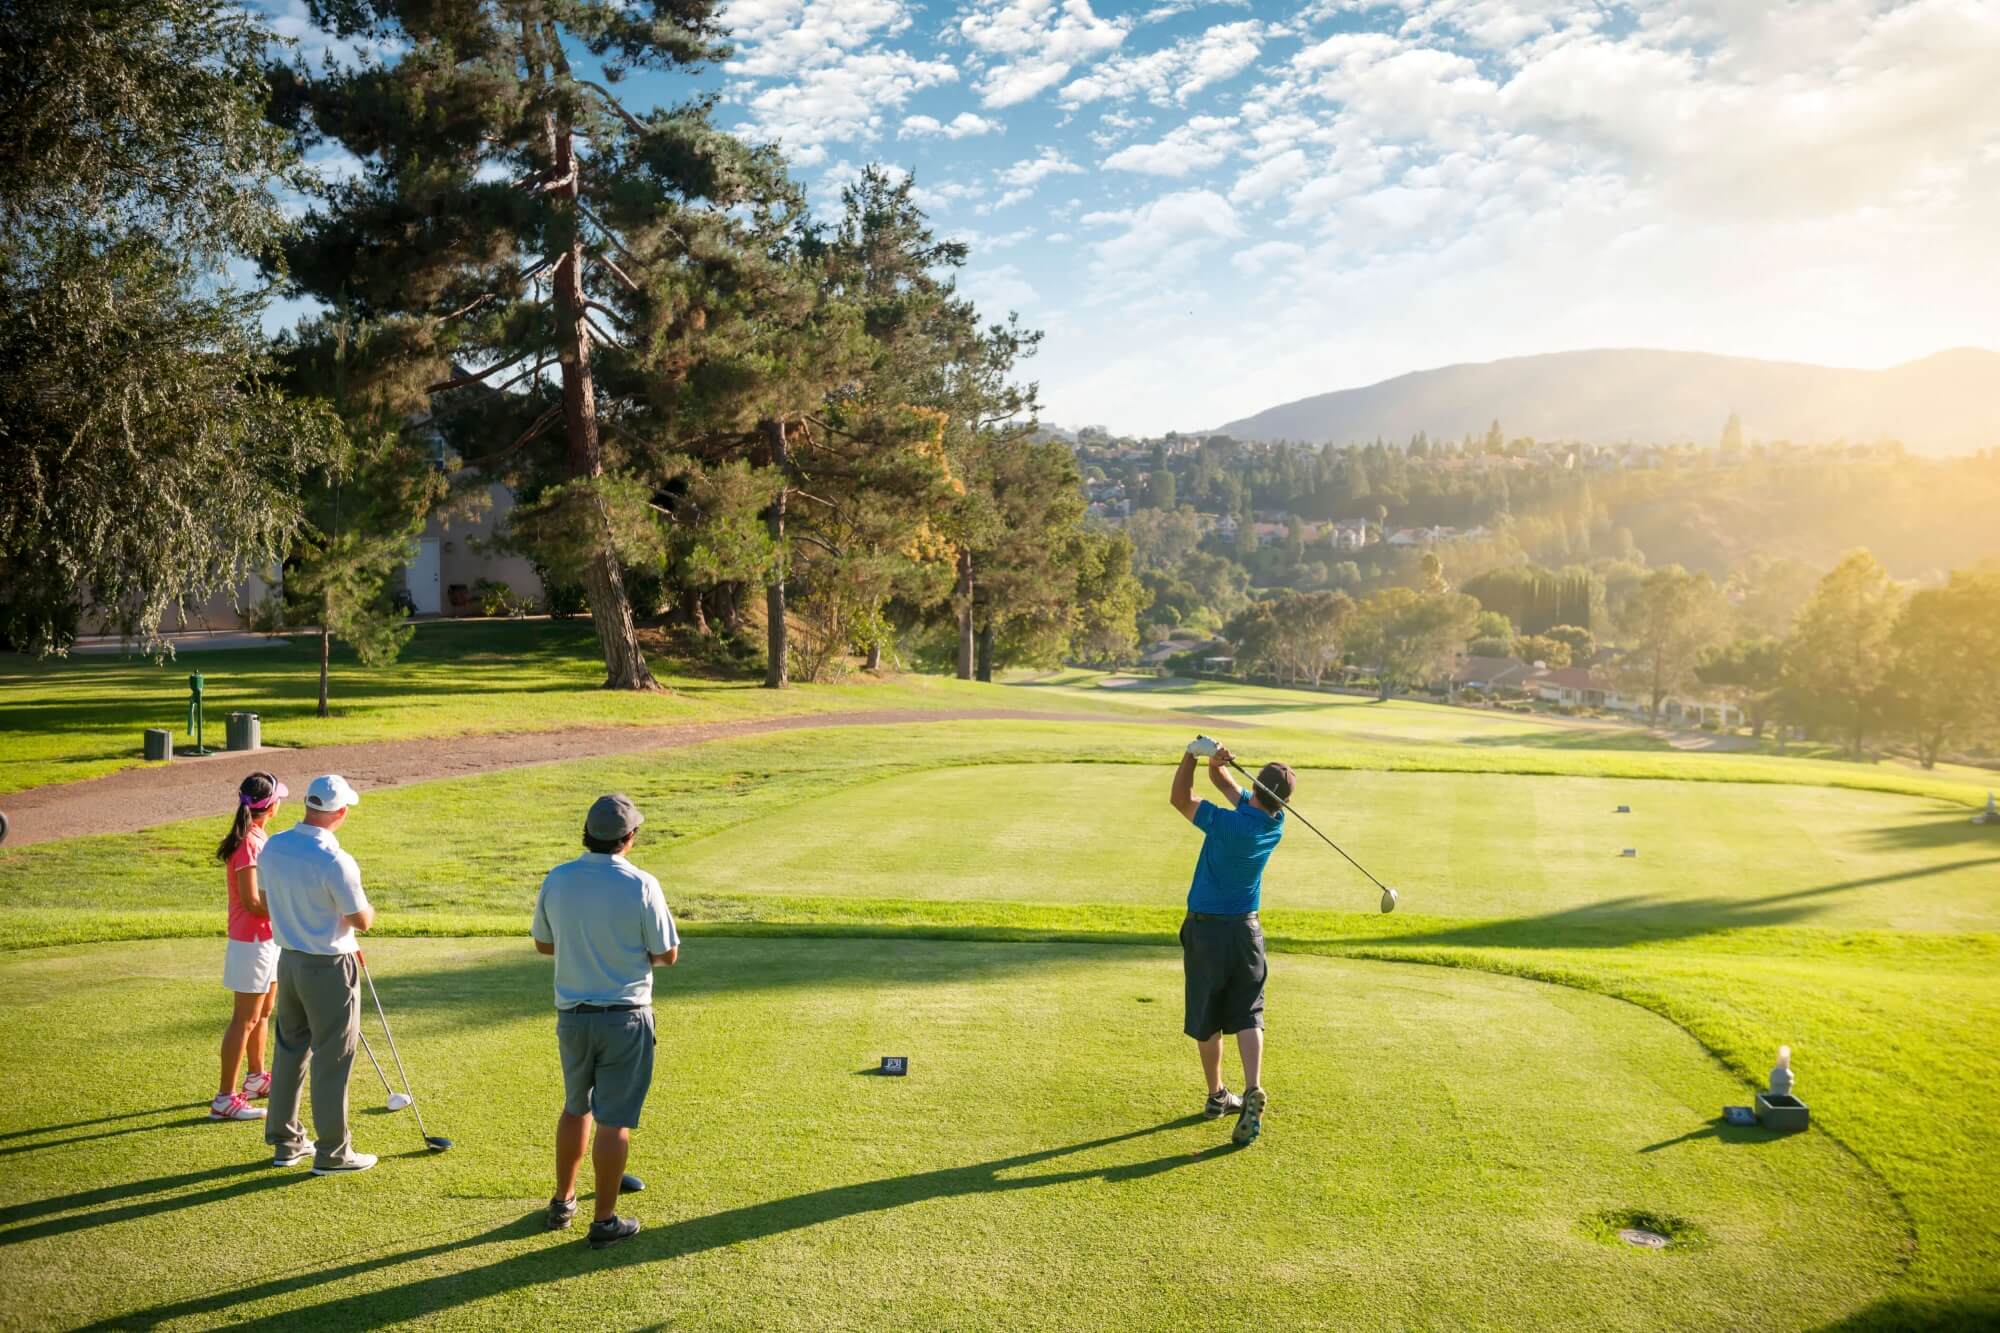 Compete with your friends on the 18 hole championship golf course.